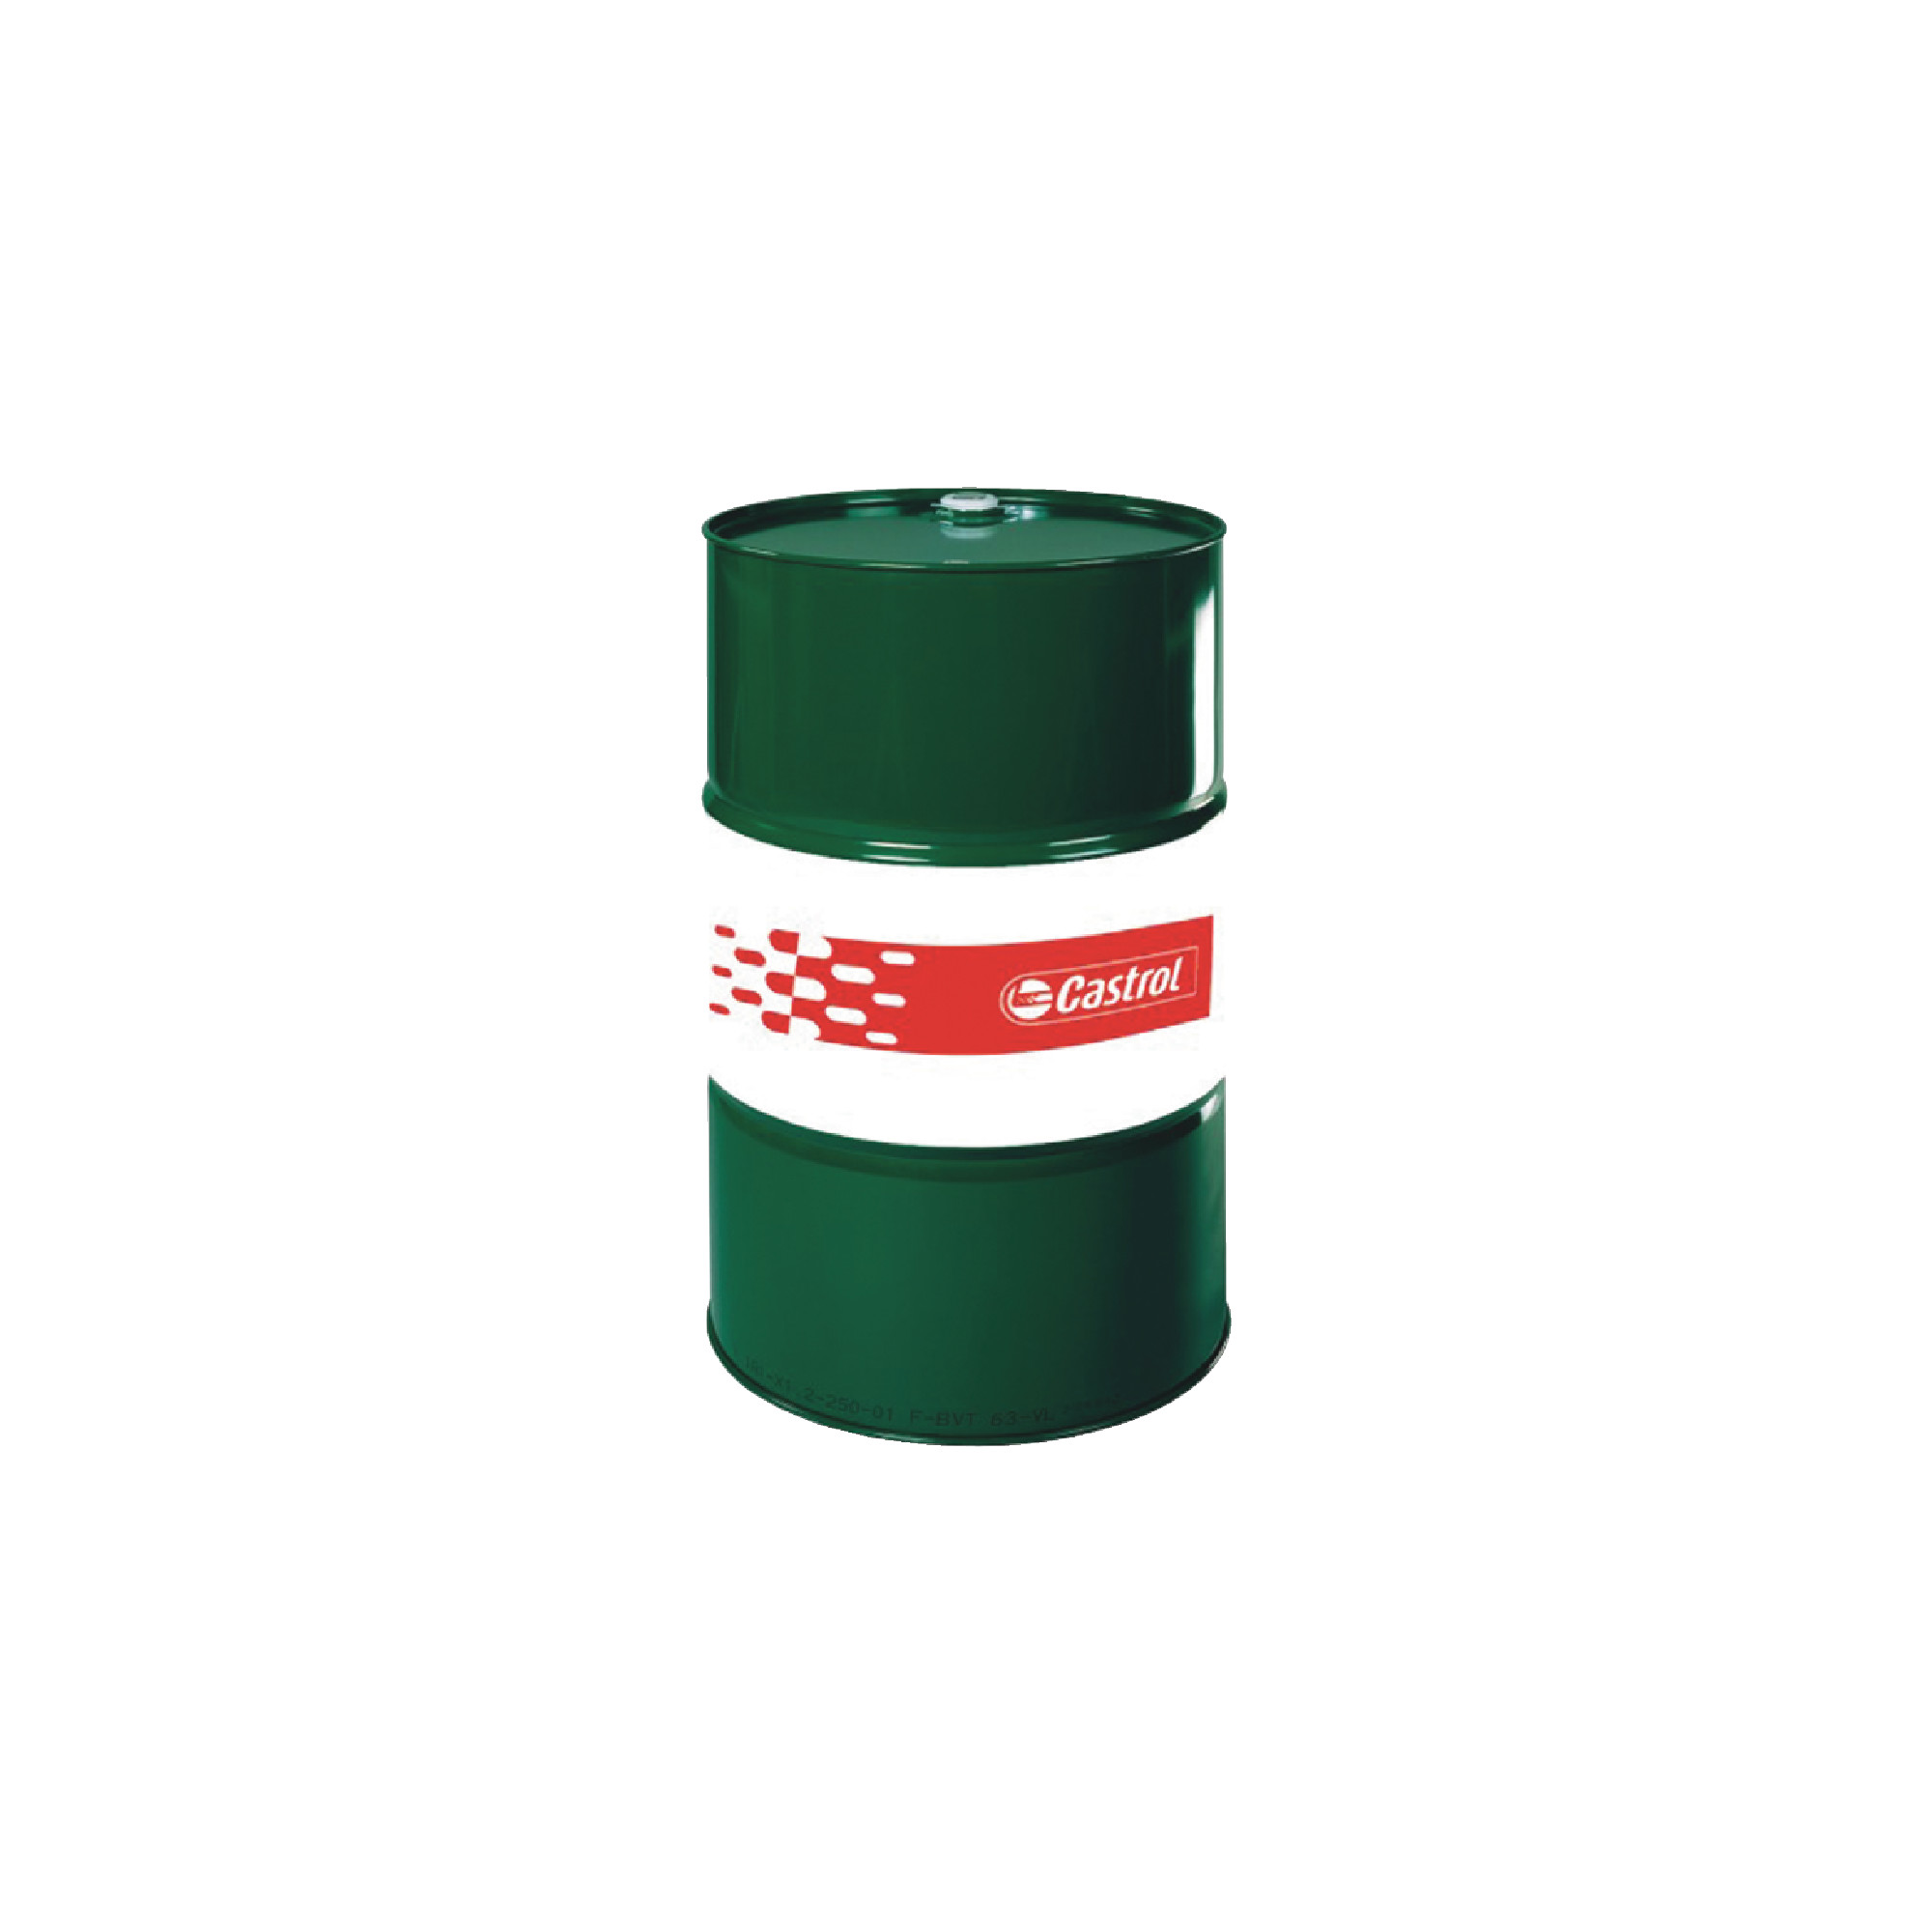 CASTROL SAFETY-COOL 70 55 Gallon Drum Heavy-Duty Water Soluble Oil